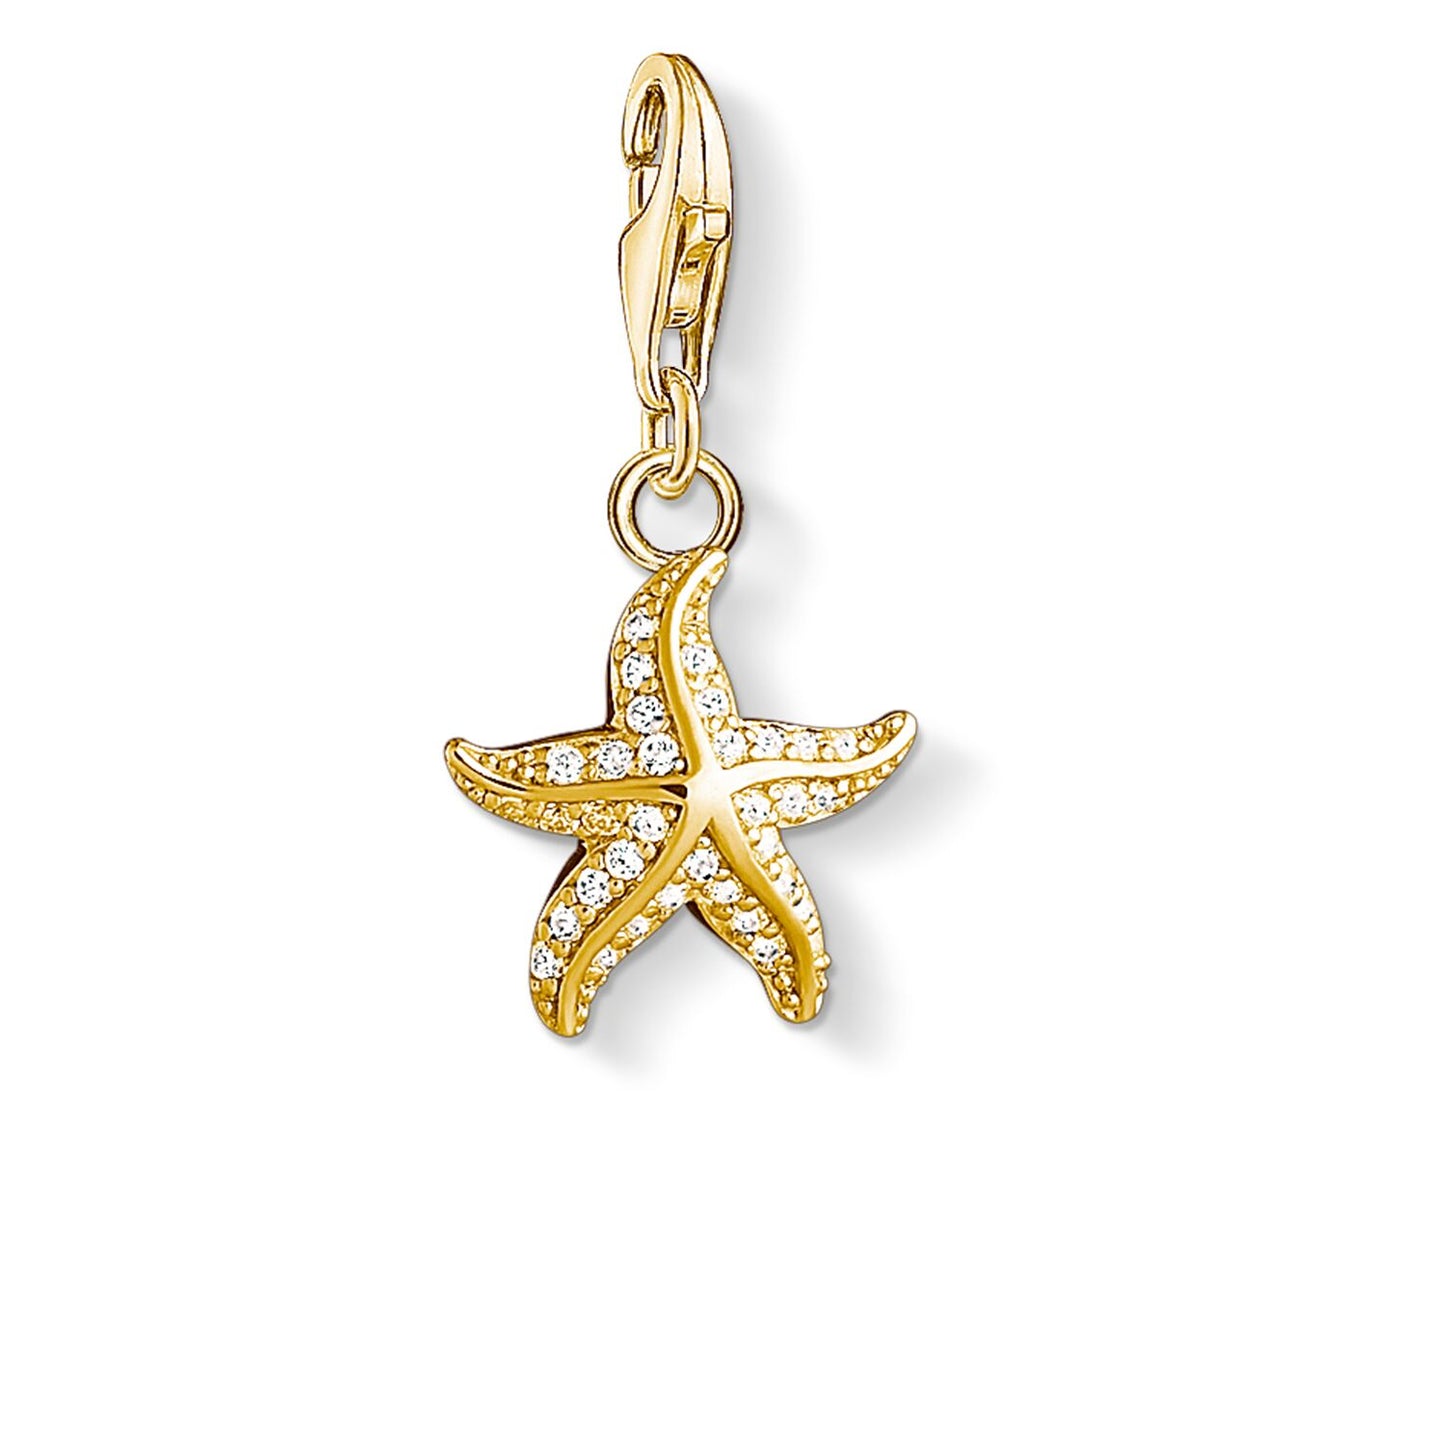 CHARM CLUB STERLING SILVER YELLOW GOLD PLATED STARFISH CZ CHARM